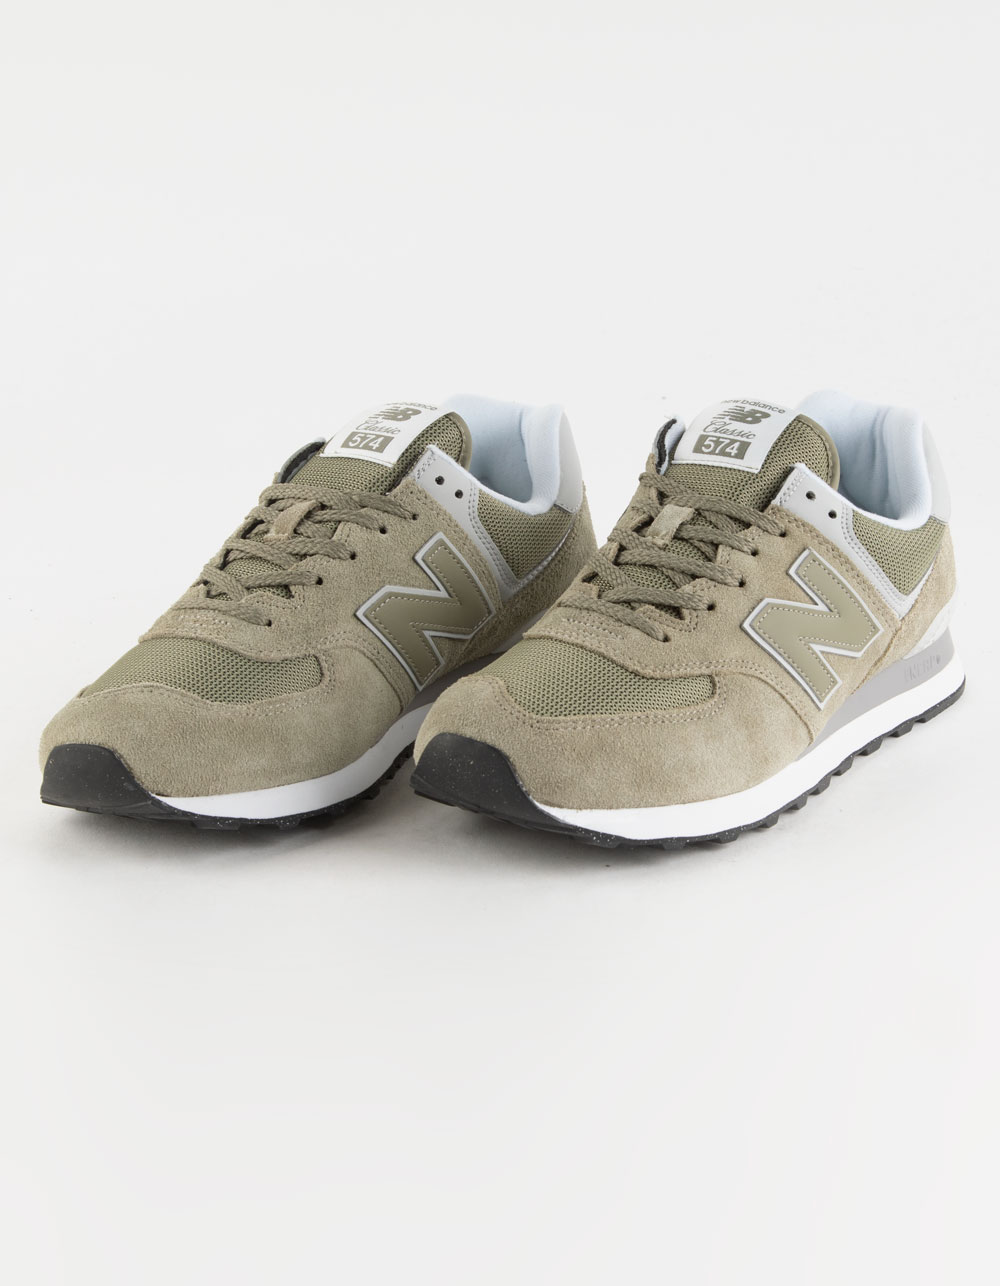 New Balance 574 V2 Men's Sneakers - Retro Style with Modern Comfort